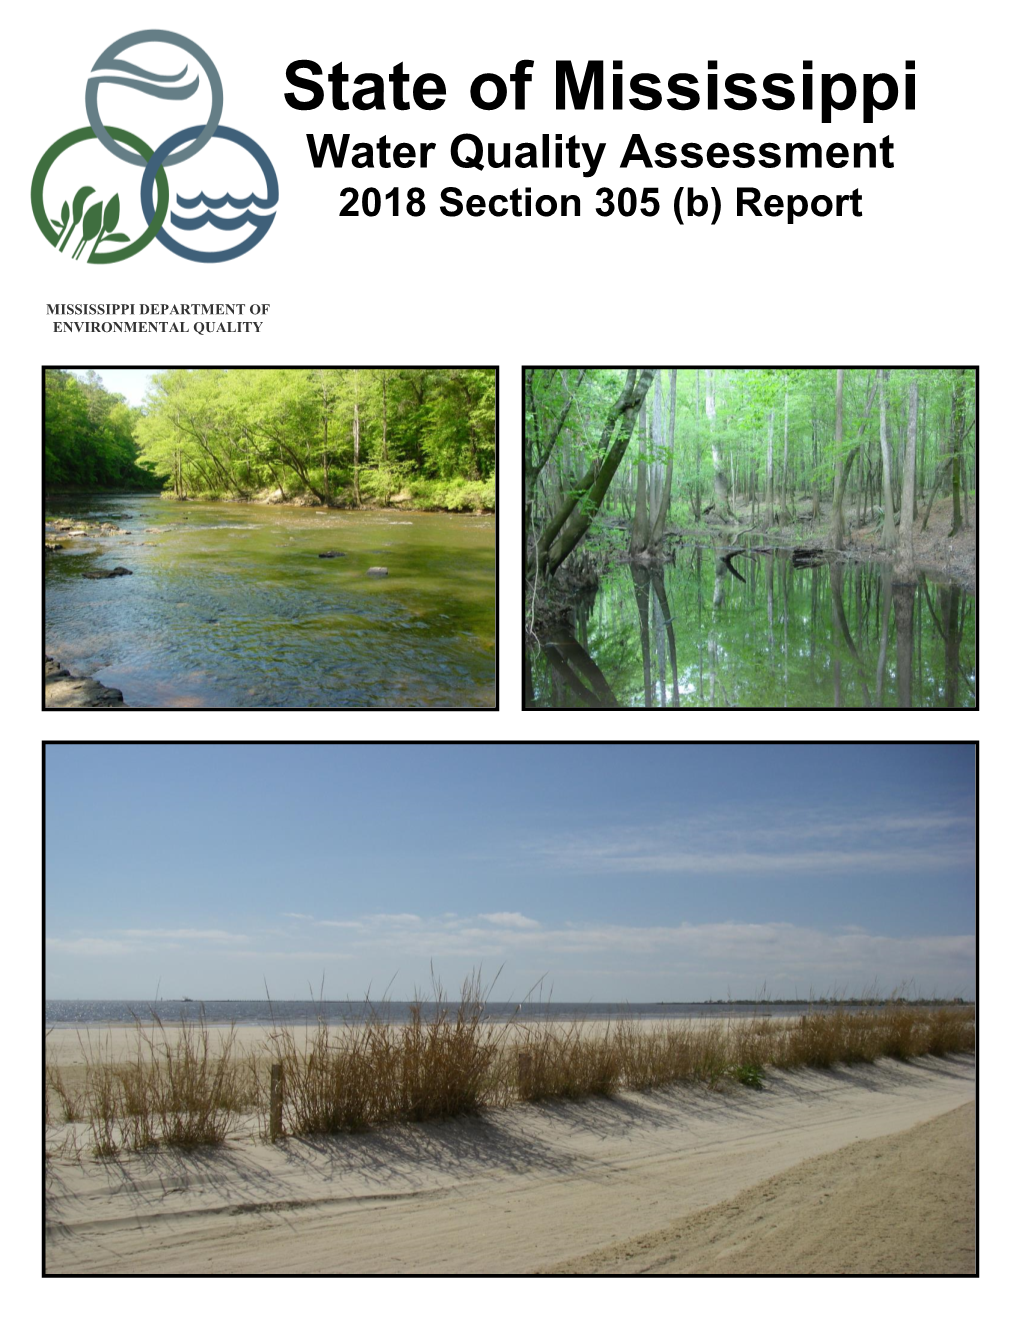 Mississippi 2018 Statewide 305(B) Water Quality Report